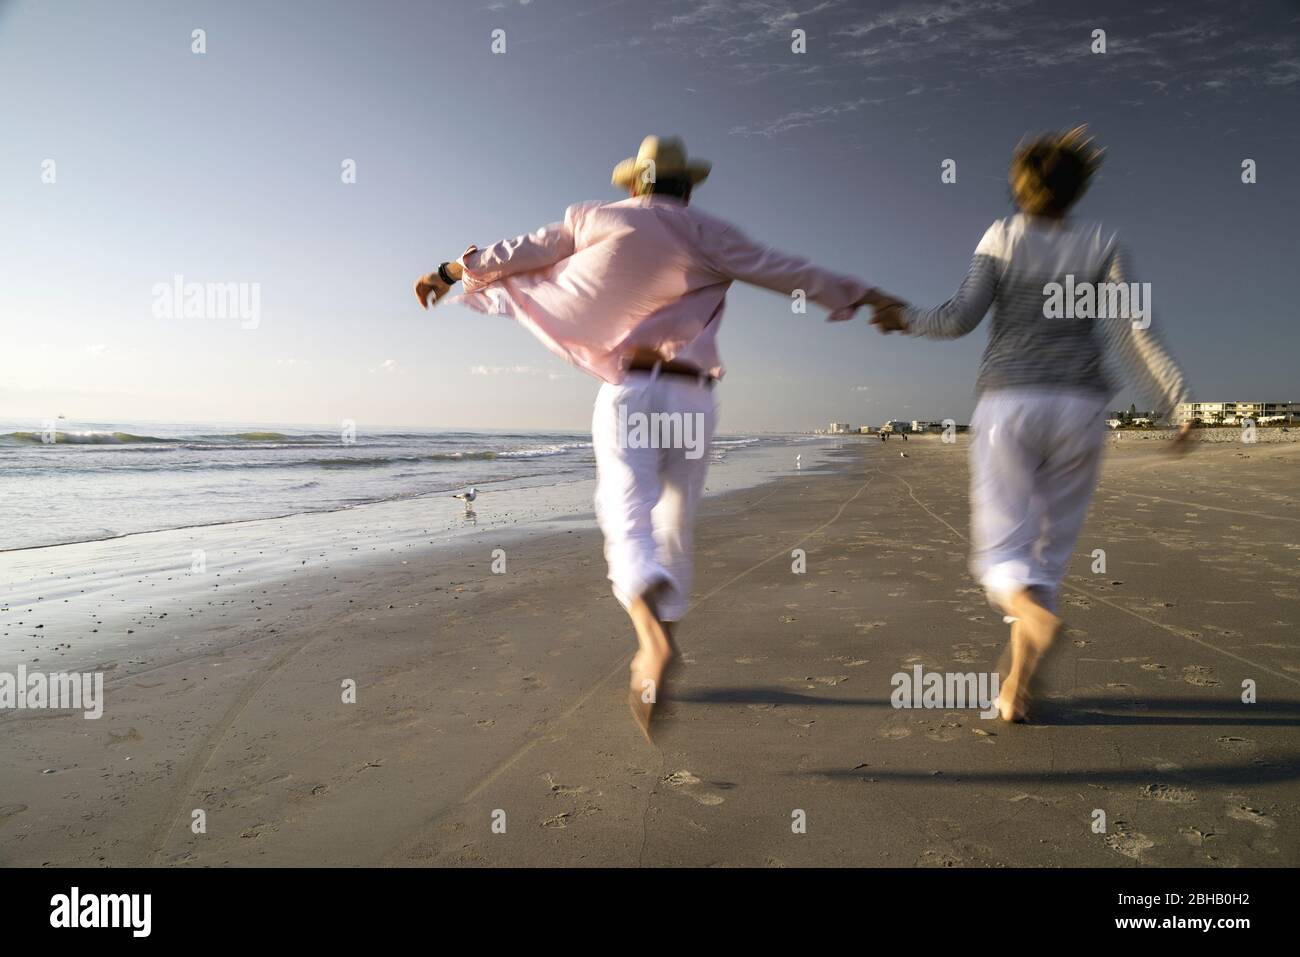 Couple from behind in maritime clothes, holding hands, runs in the surf area of the beach, cheerfulness Stock Photo